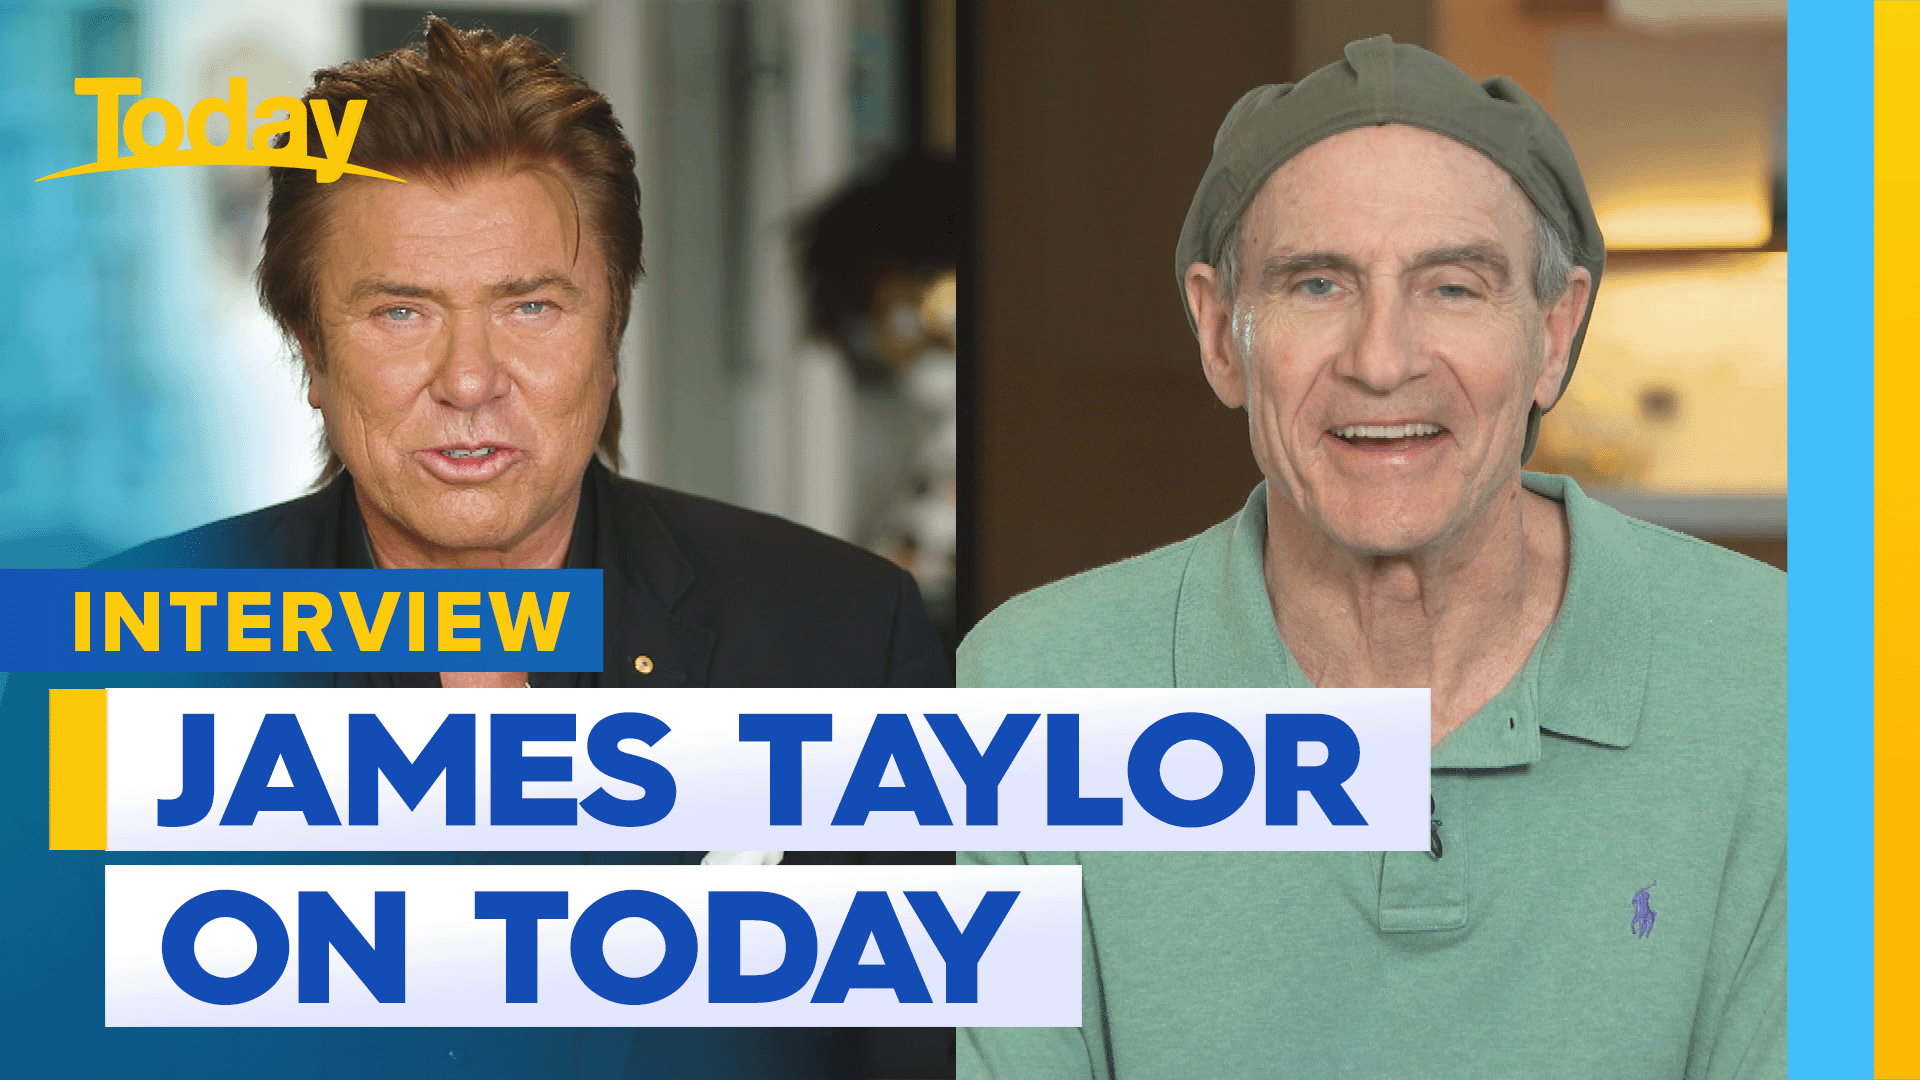 James Taylor catches up with Today